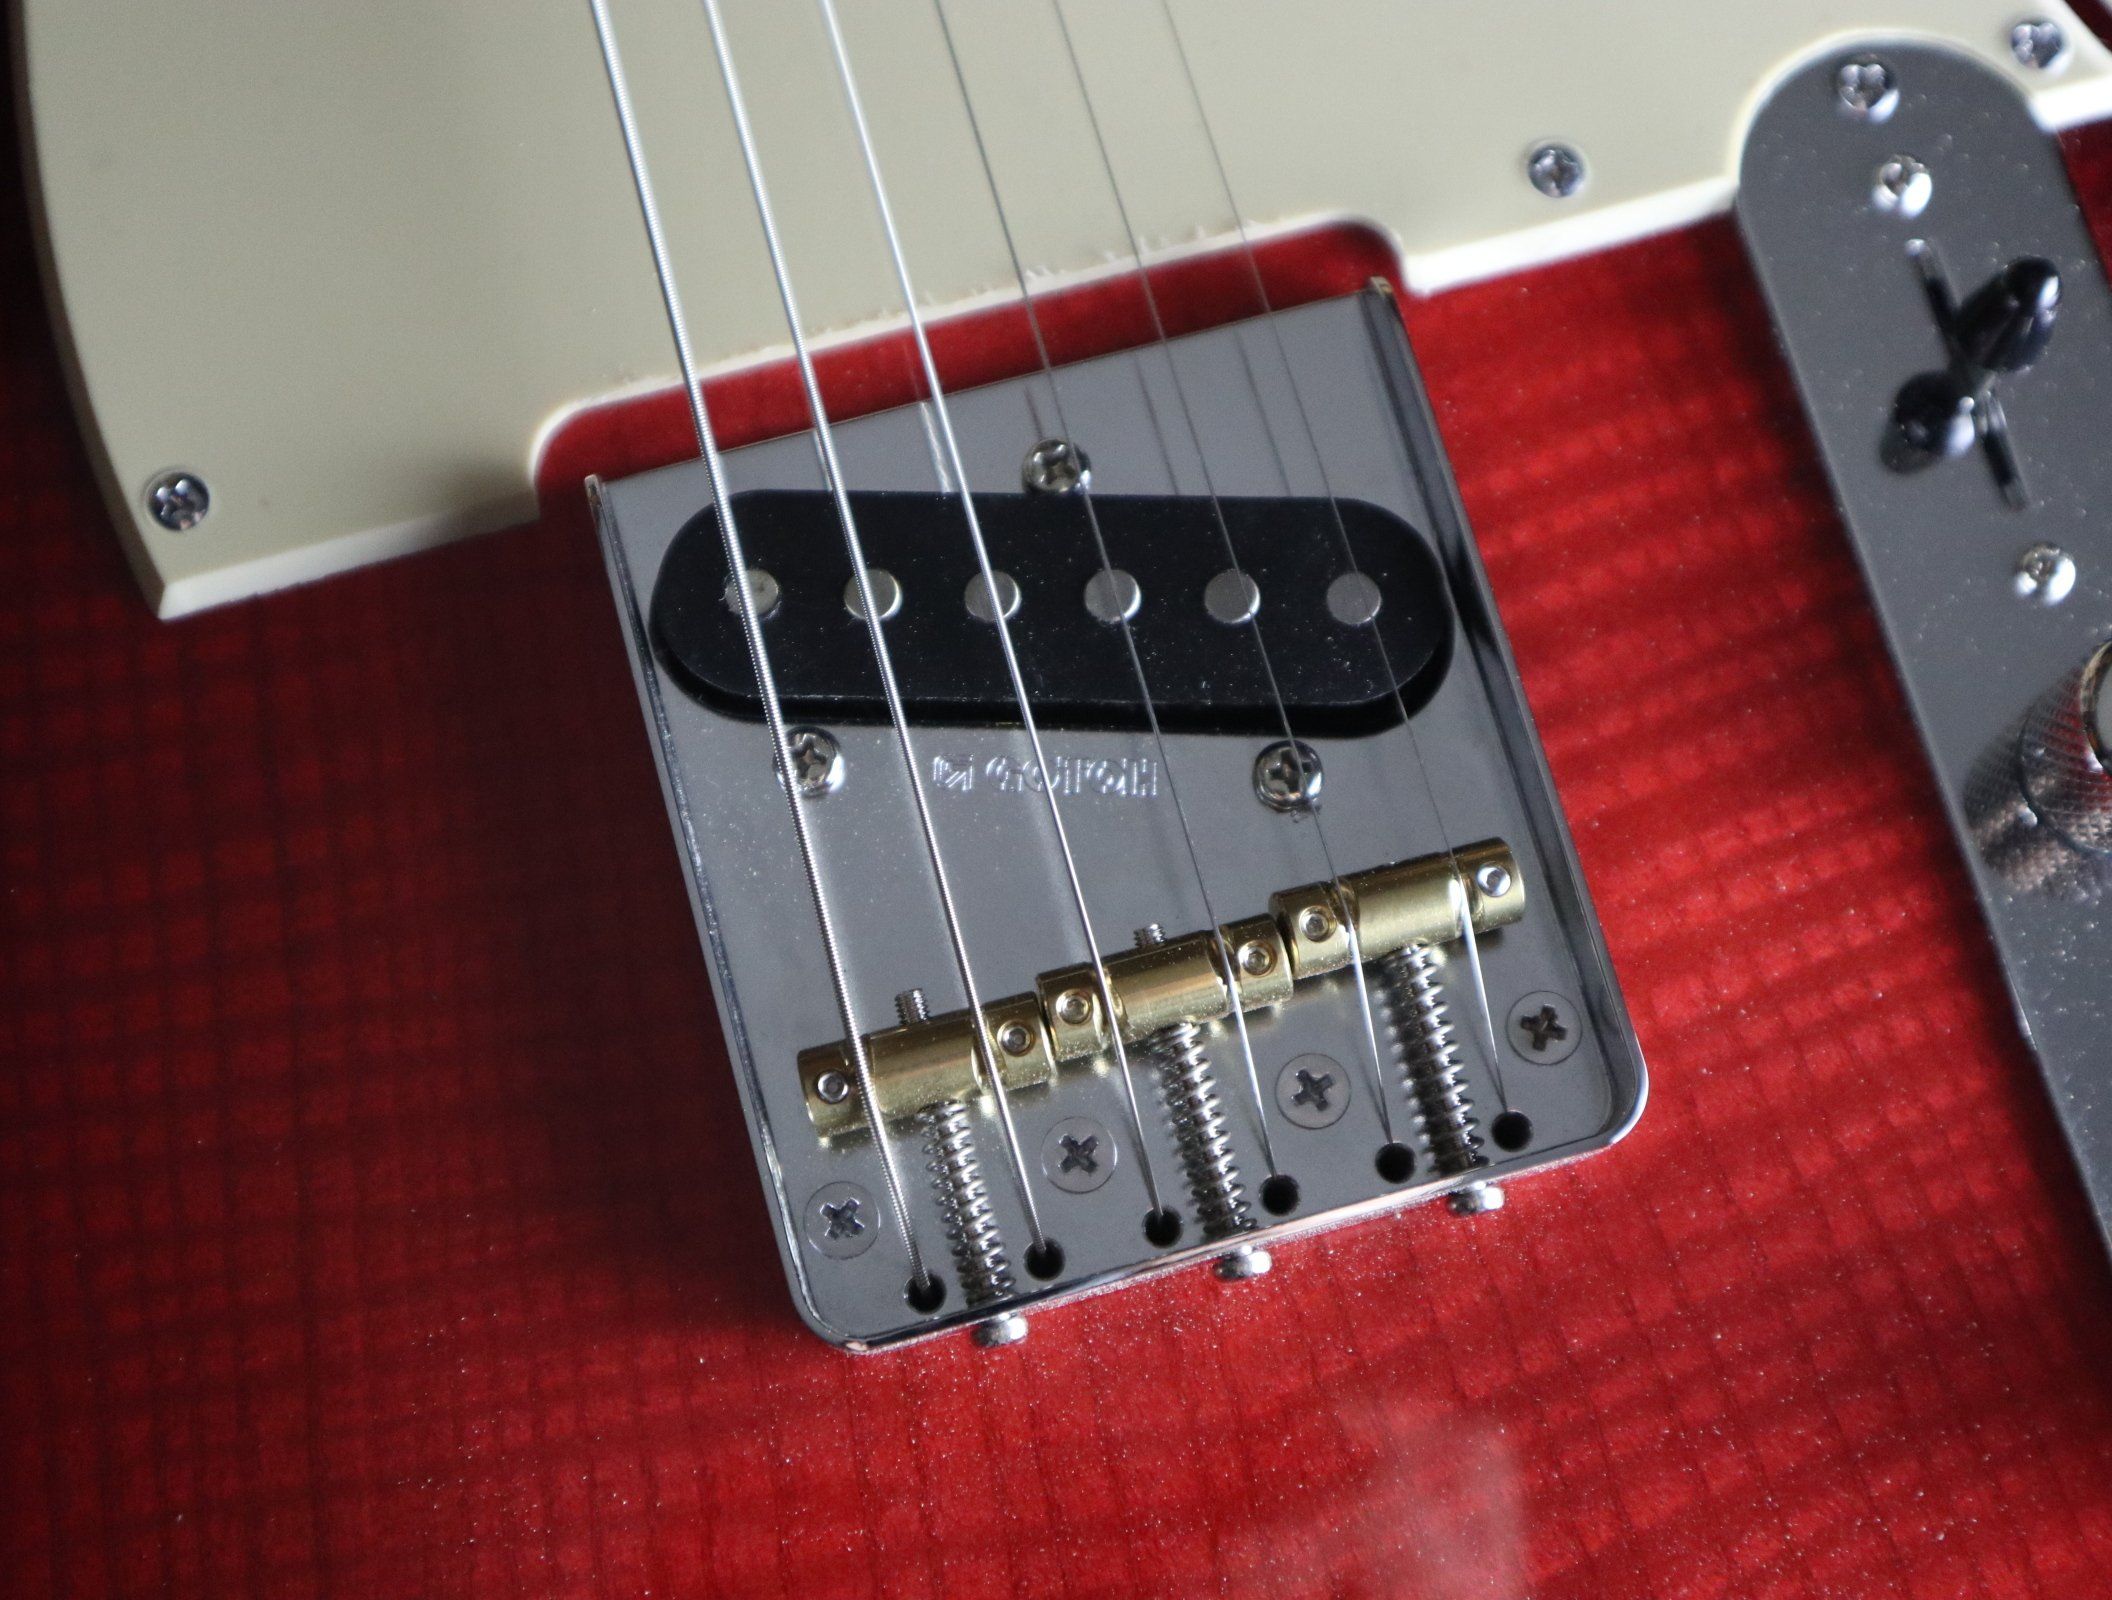 Gordon Smith Classic T "Custom" Trans Red Flame Maple Neck, Electric Guitar for sale at Richards Guitars.